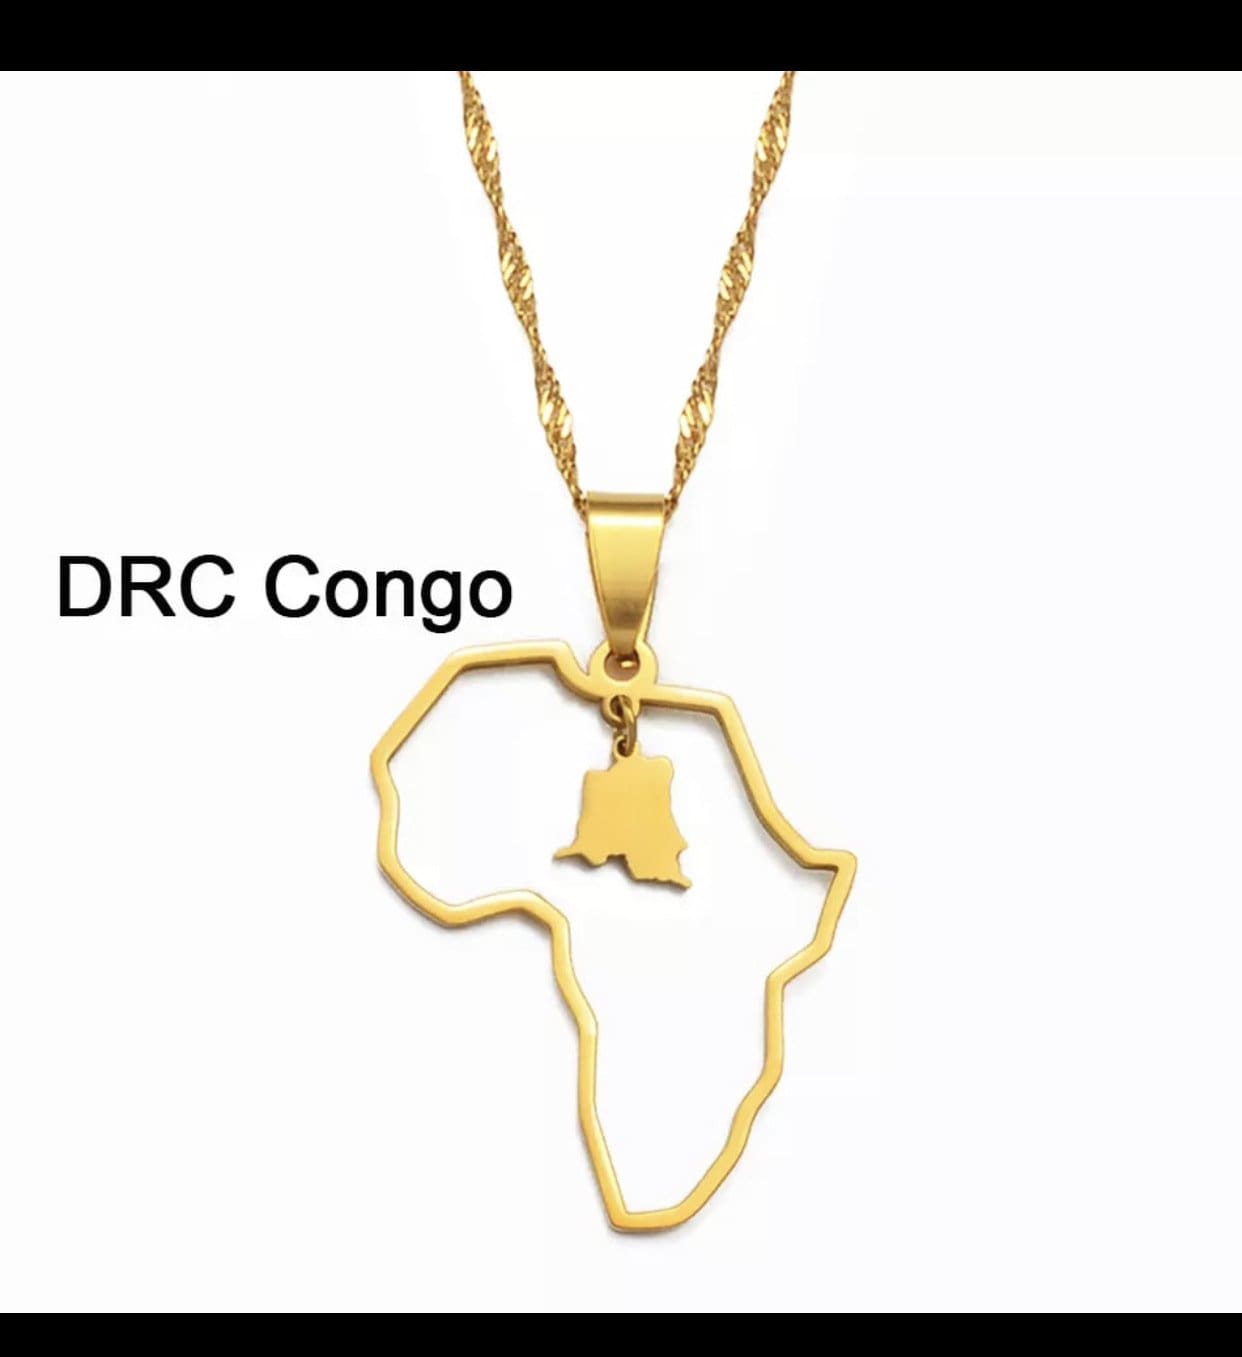 Veryldesigns Necklace DRC (Democratic Republic of Congo) Custom African country Necklace